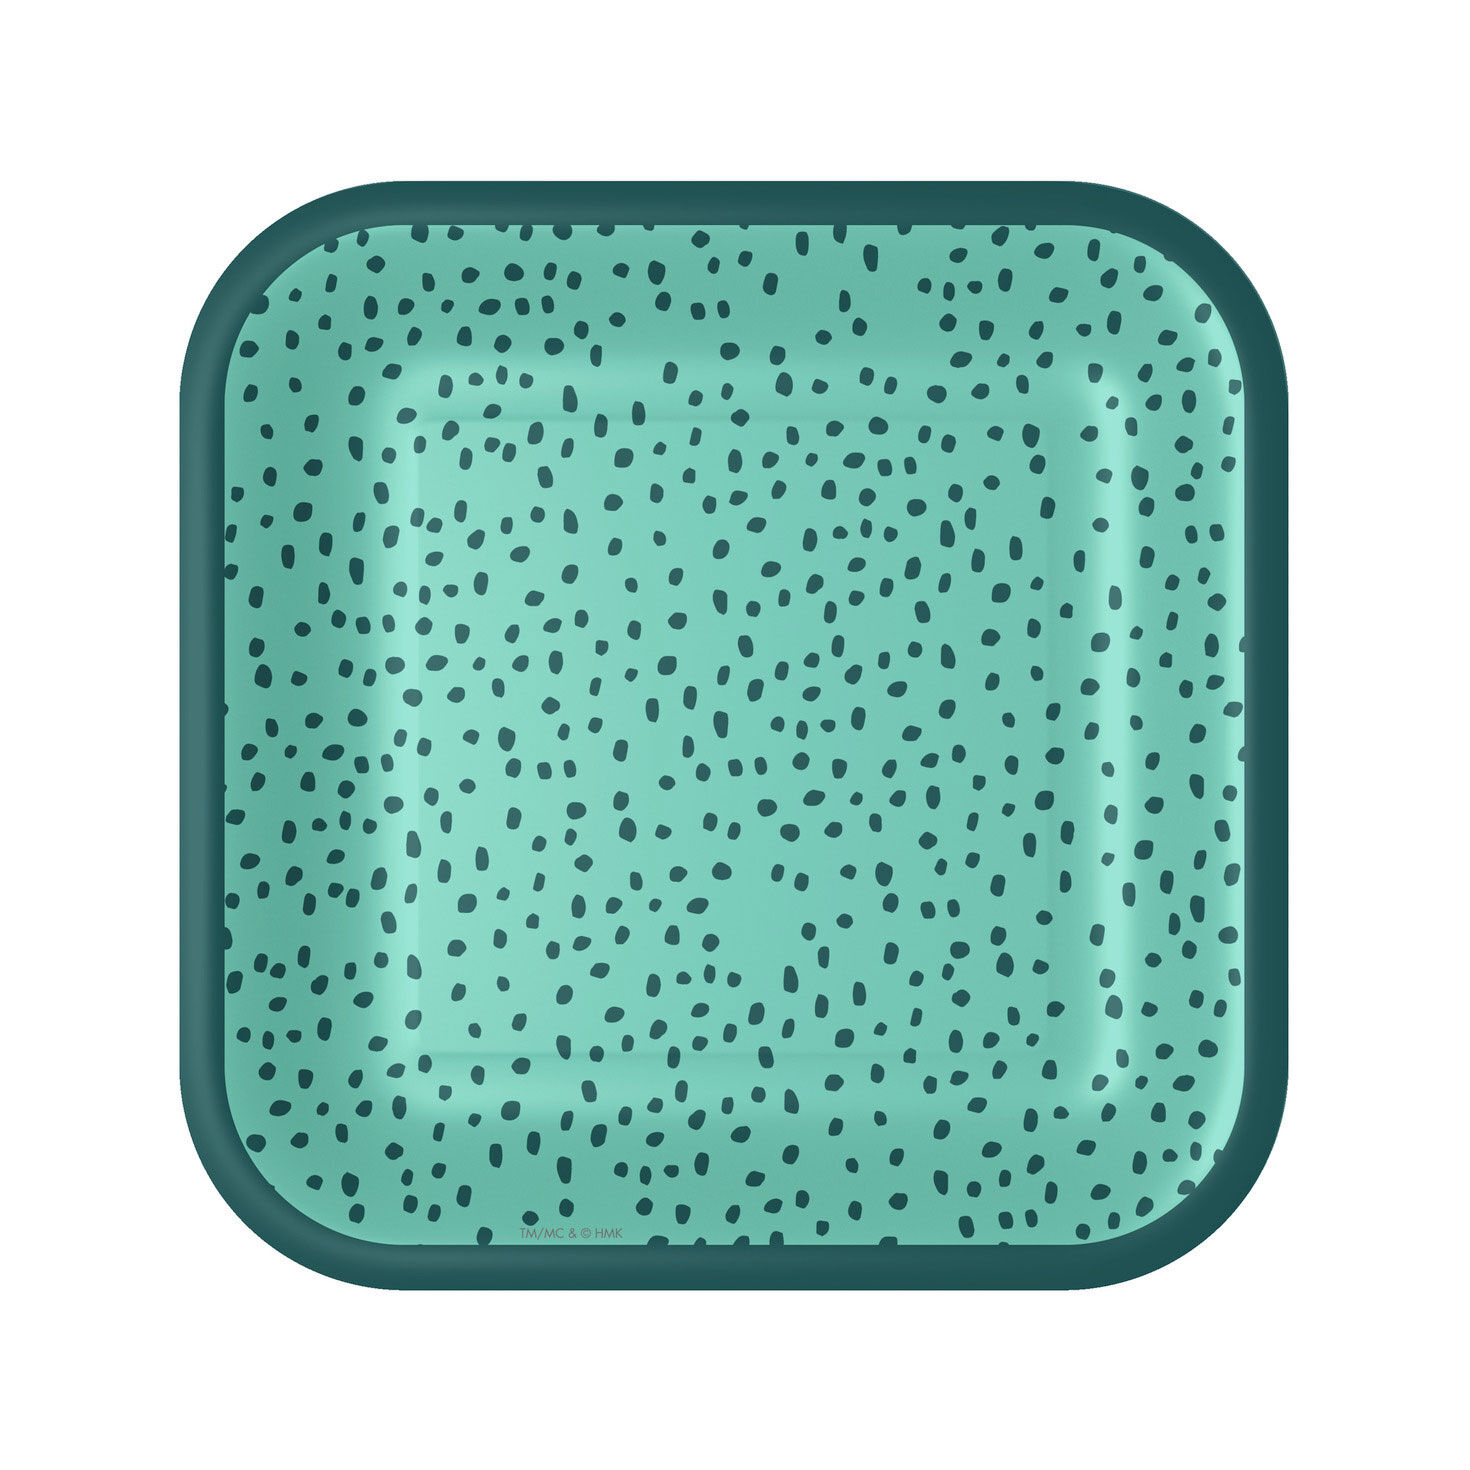 Aqua With Green Dots Square Dessert Plates, Set of 8 for only USD 3.99 | Hallmark